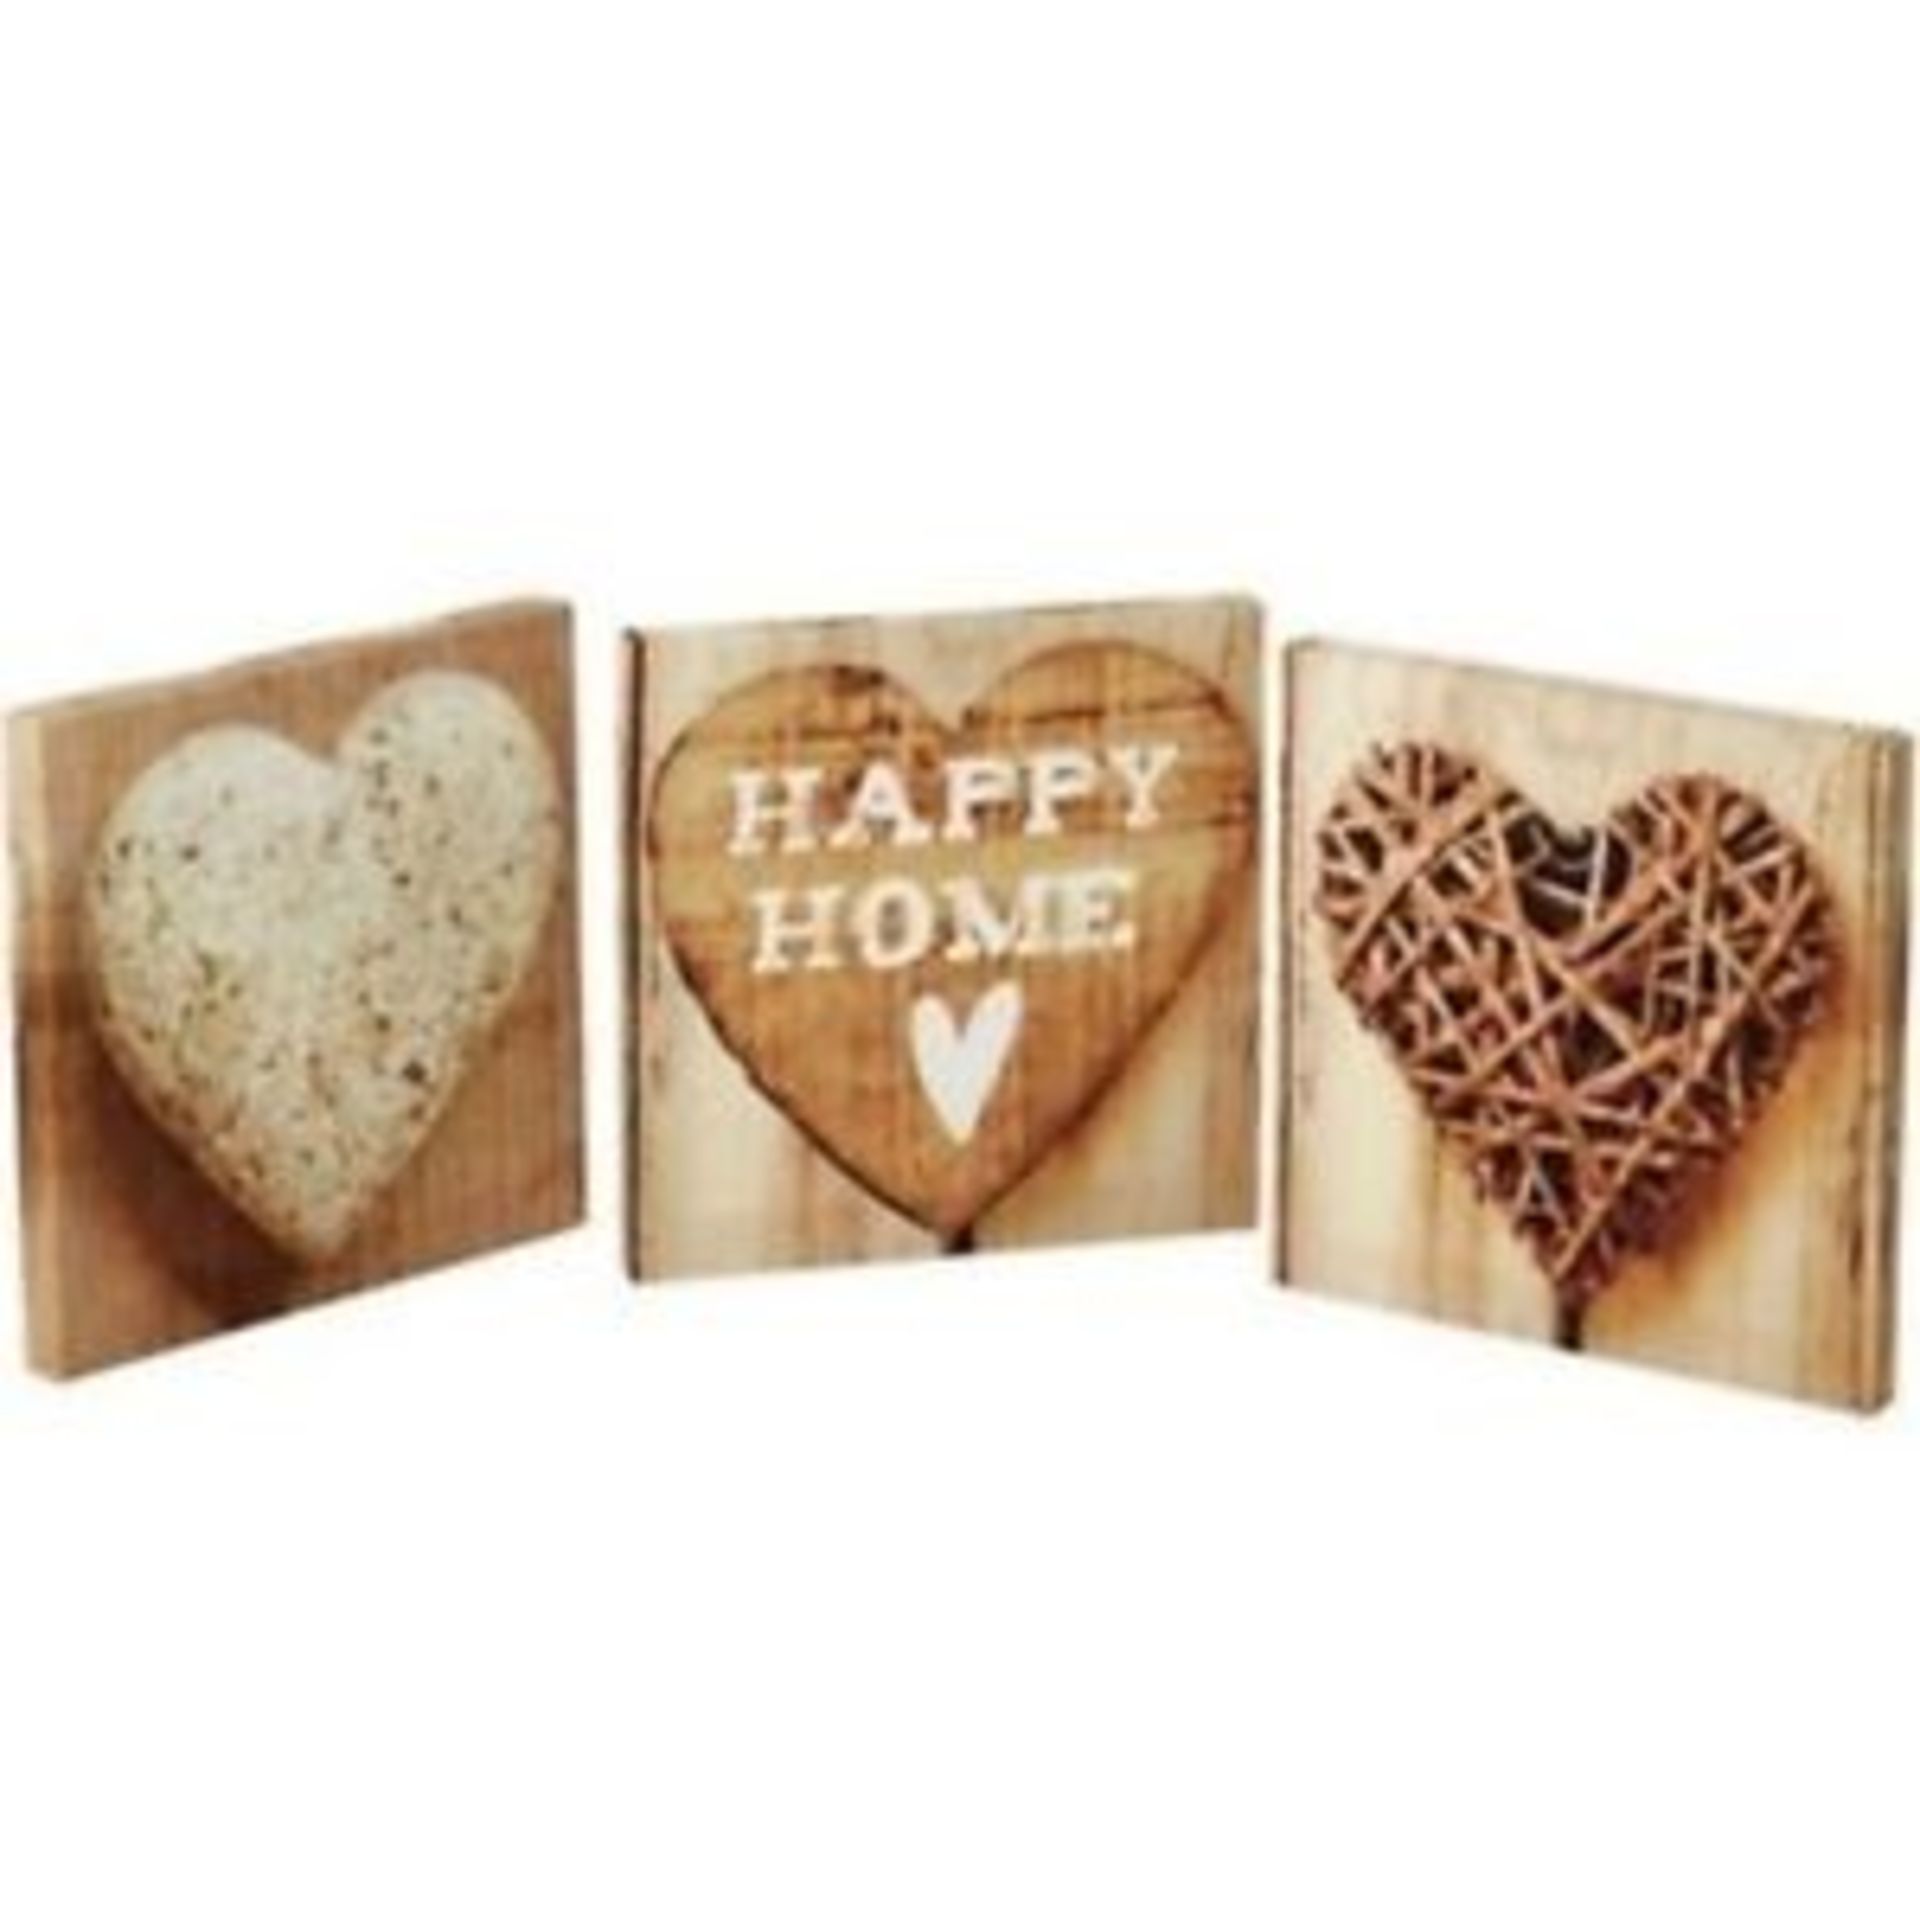 1 AS NEW BOXED ARTHOUSE HAPPY HOME LOVE HEART SET OF 3 CANVAS WALL ART 20CM EACH (VIEWING HIGHLY